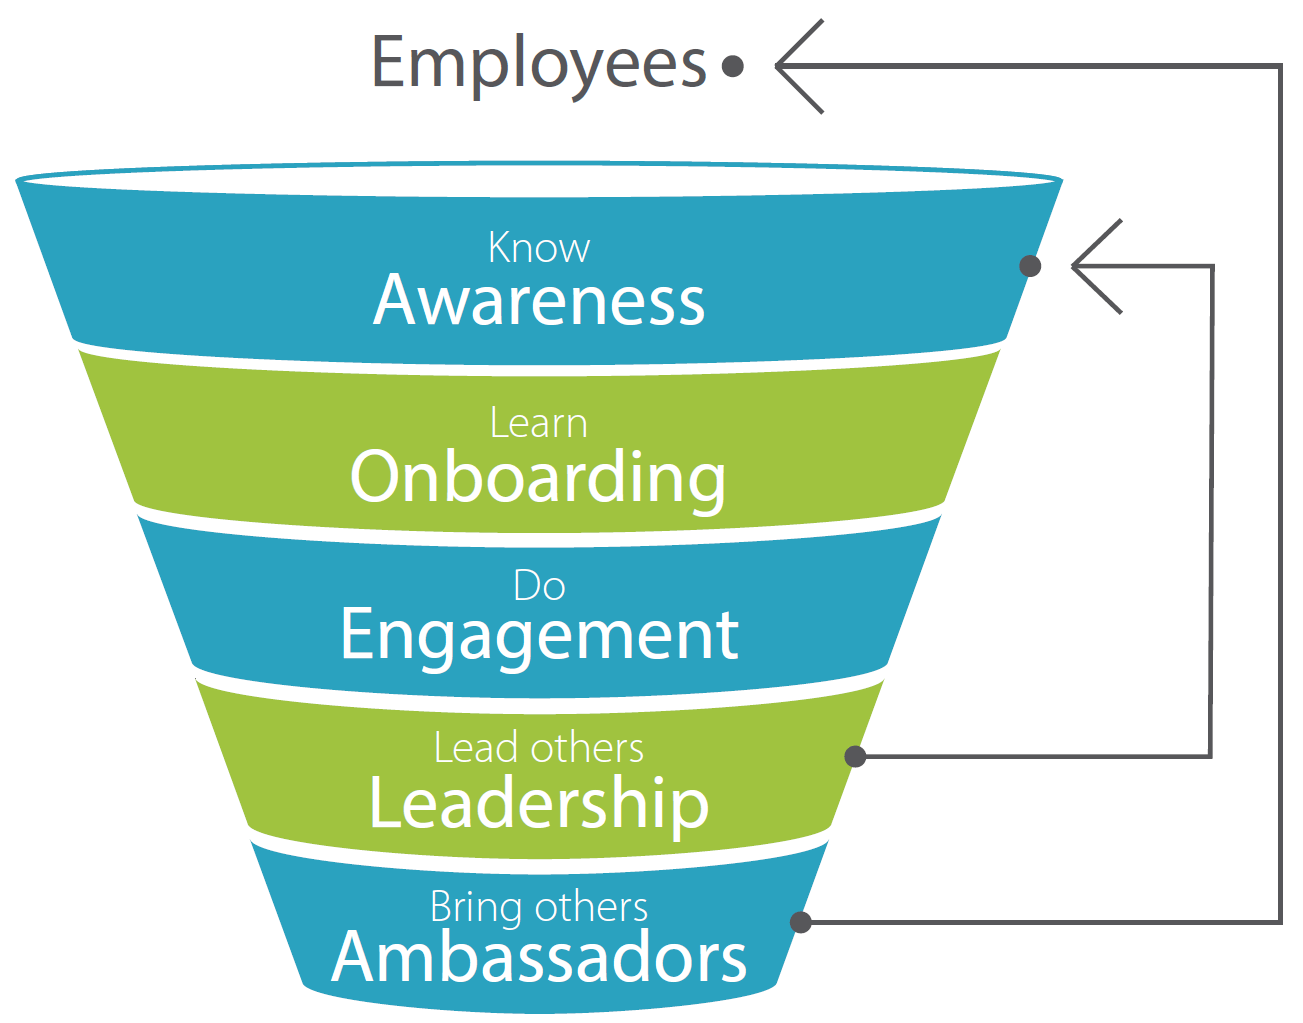 Using Flow Theory and Gamification in the Content of the Employee Engagement Funnel